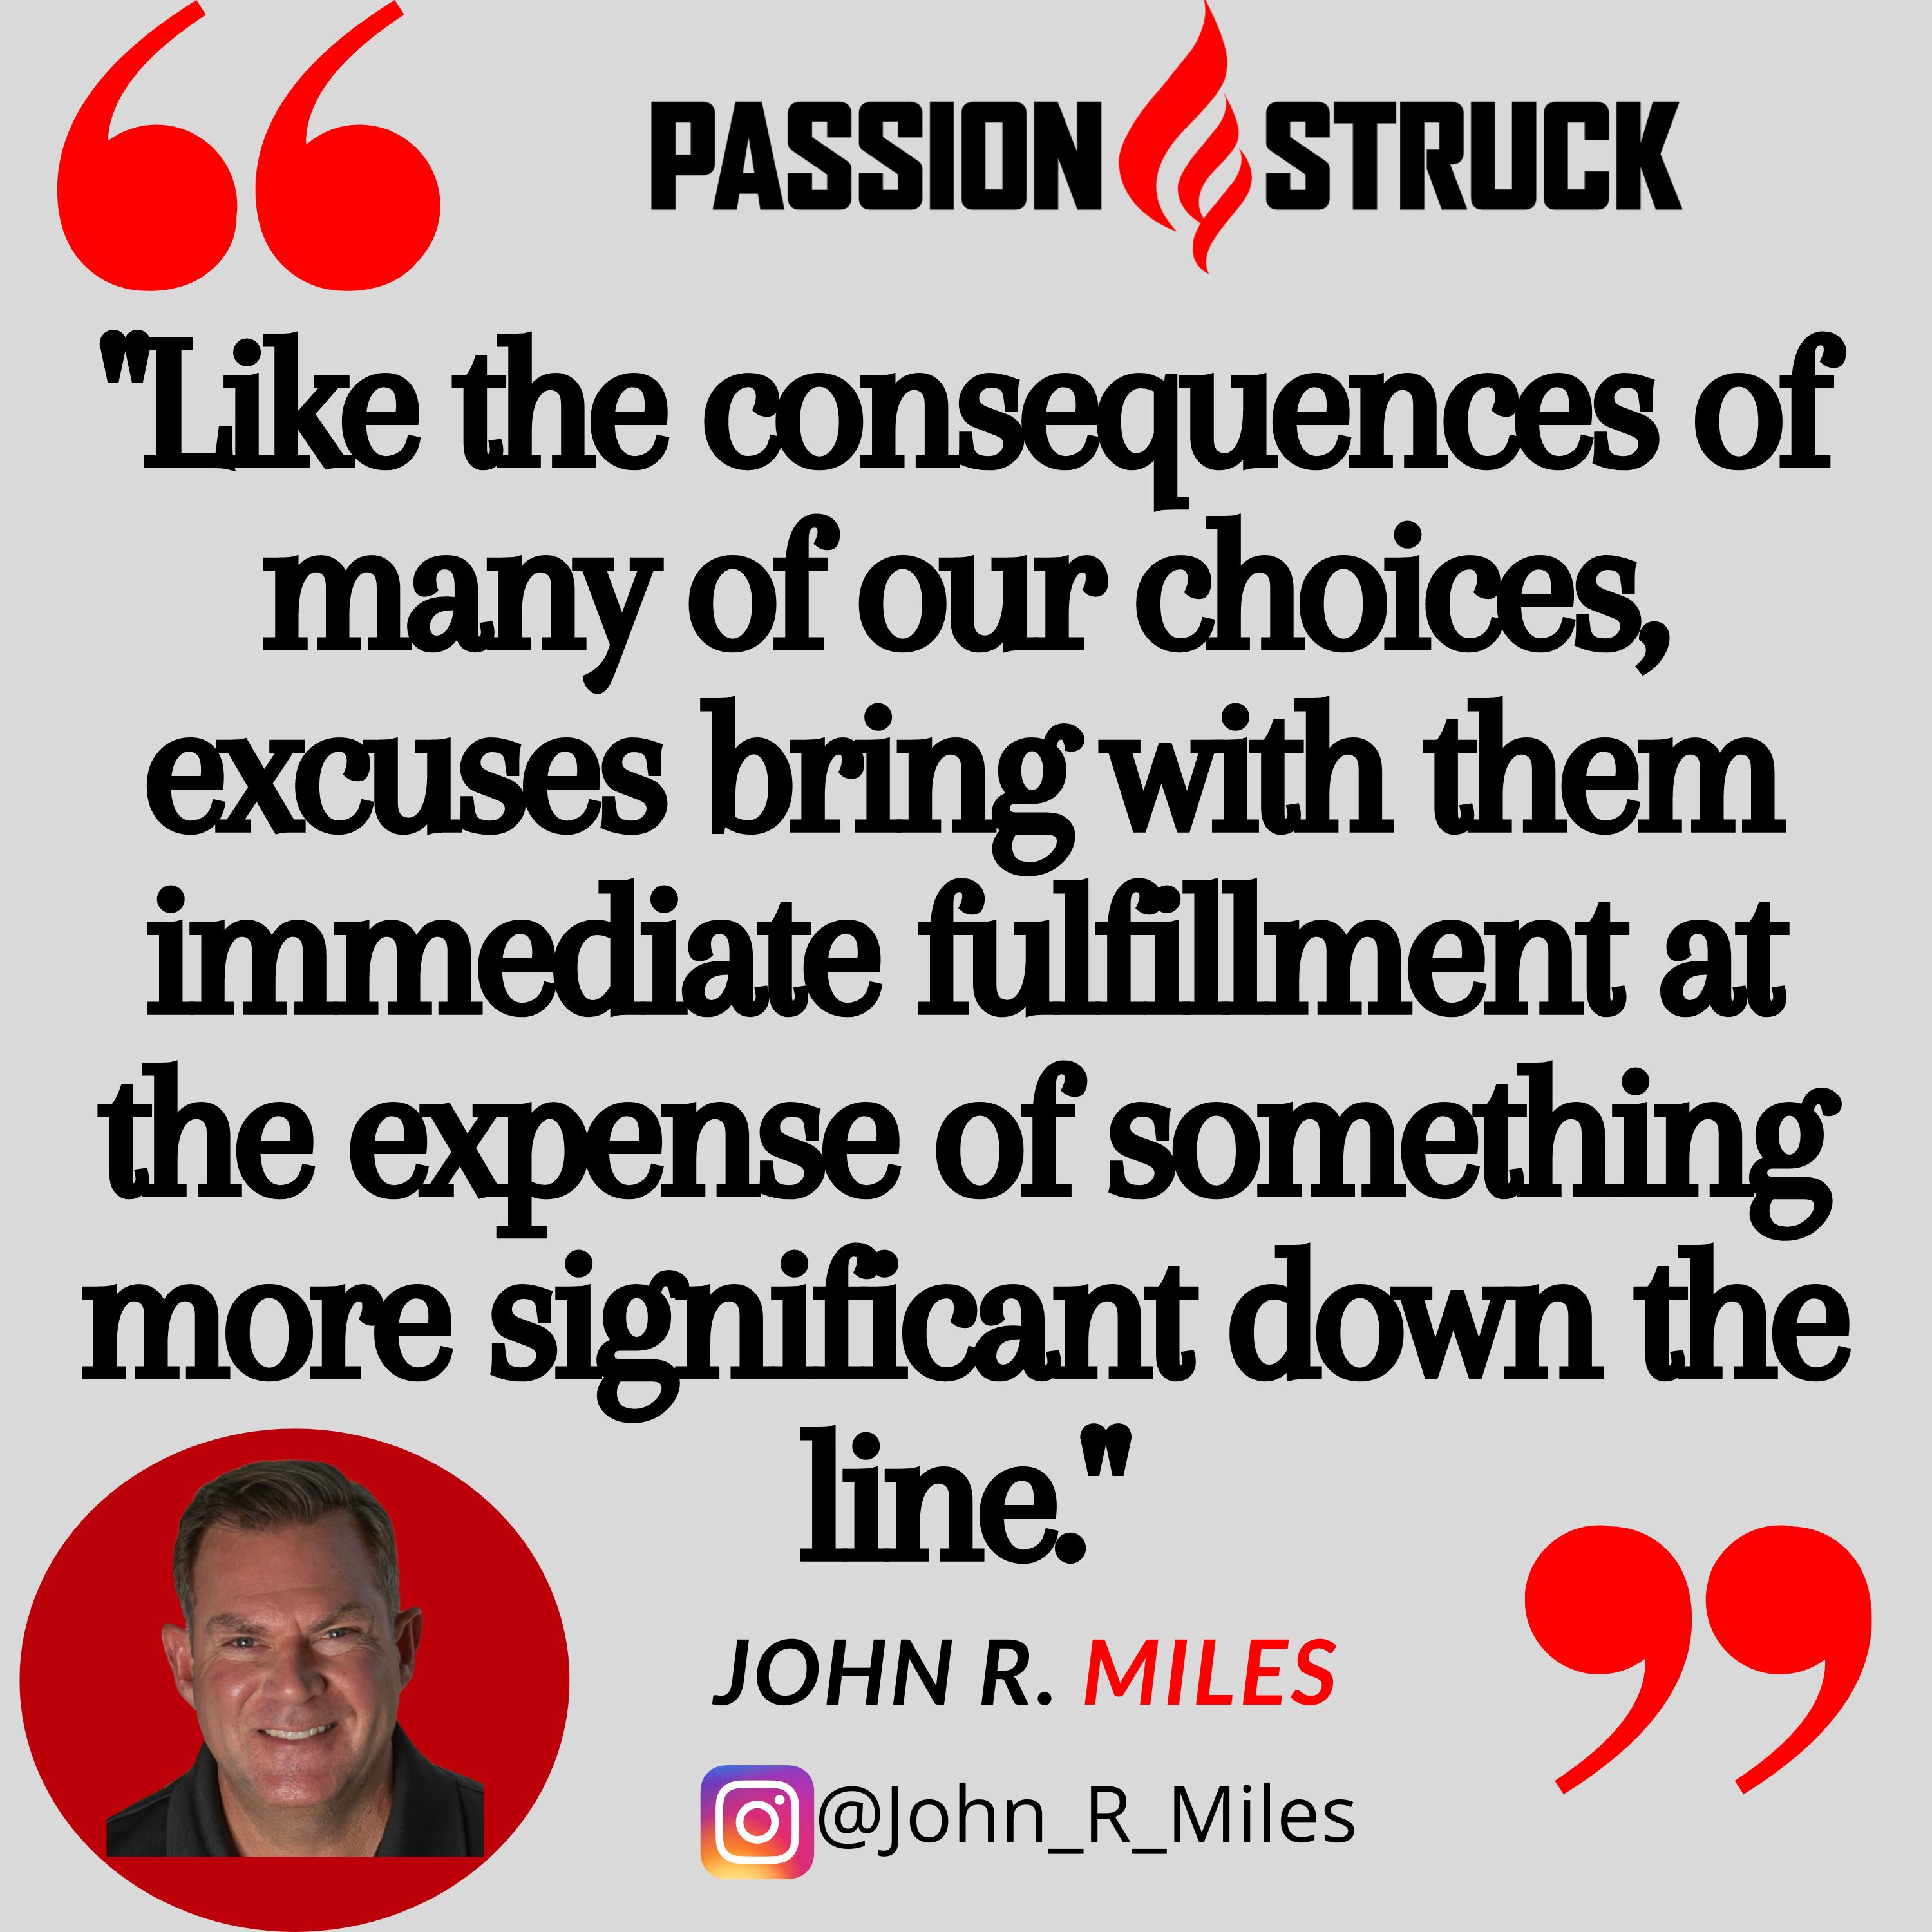 John R. Miles Quote about the need to stop making excuses: "Like the consequences of many of our choices, excuses bring with them immediate fulfillment at the expense of something more significant down the line."